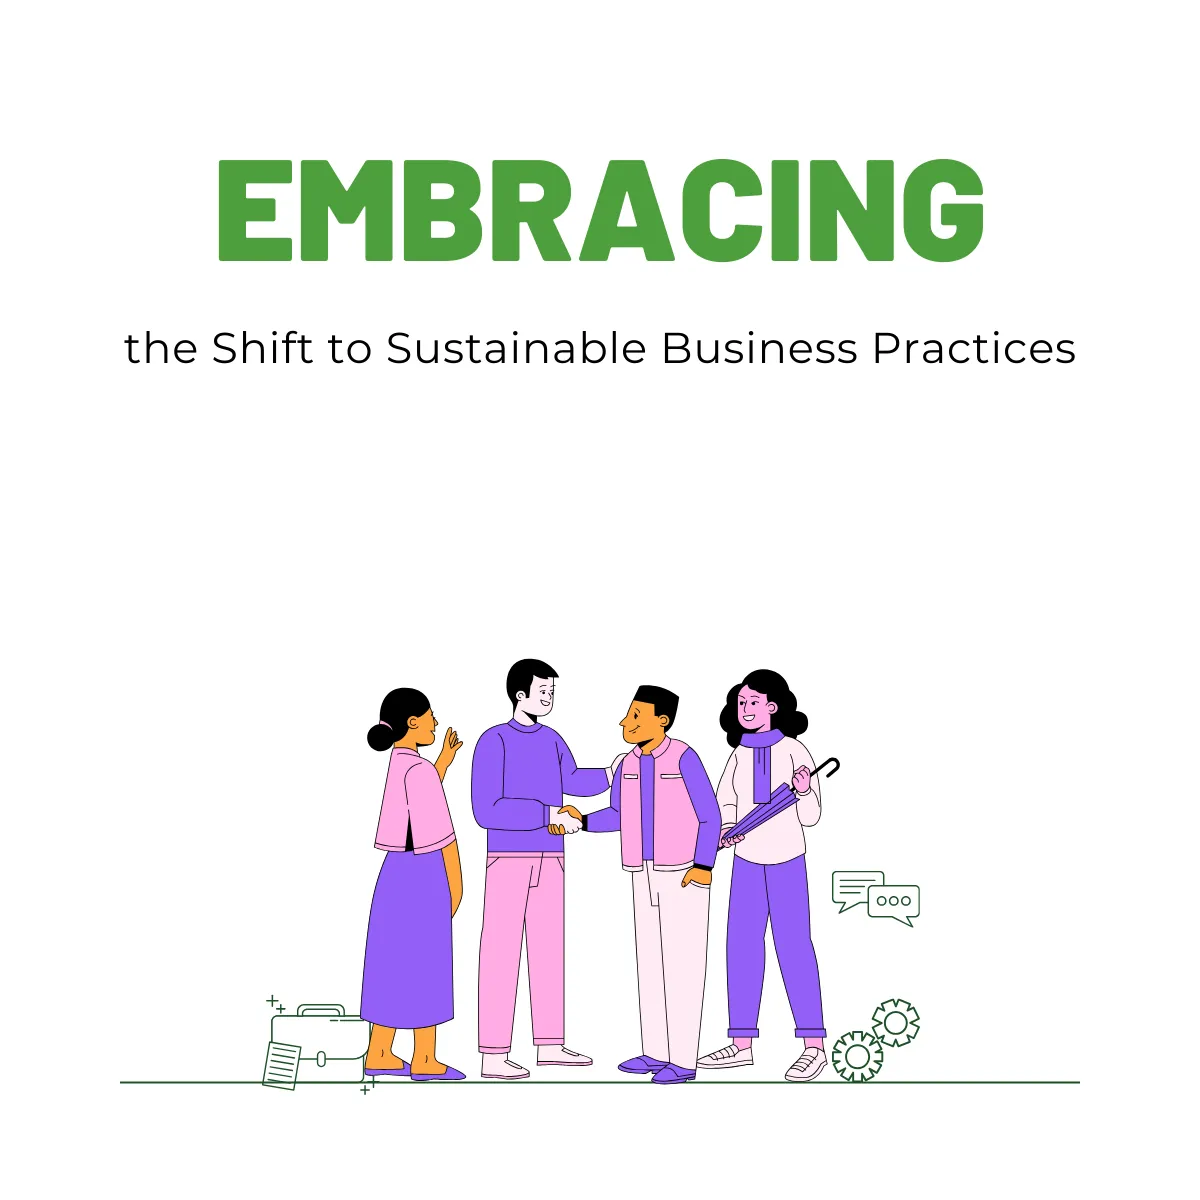 Embracing the Shift to Sustainable Business Practices